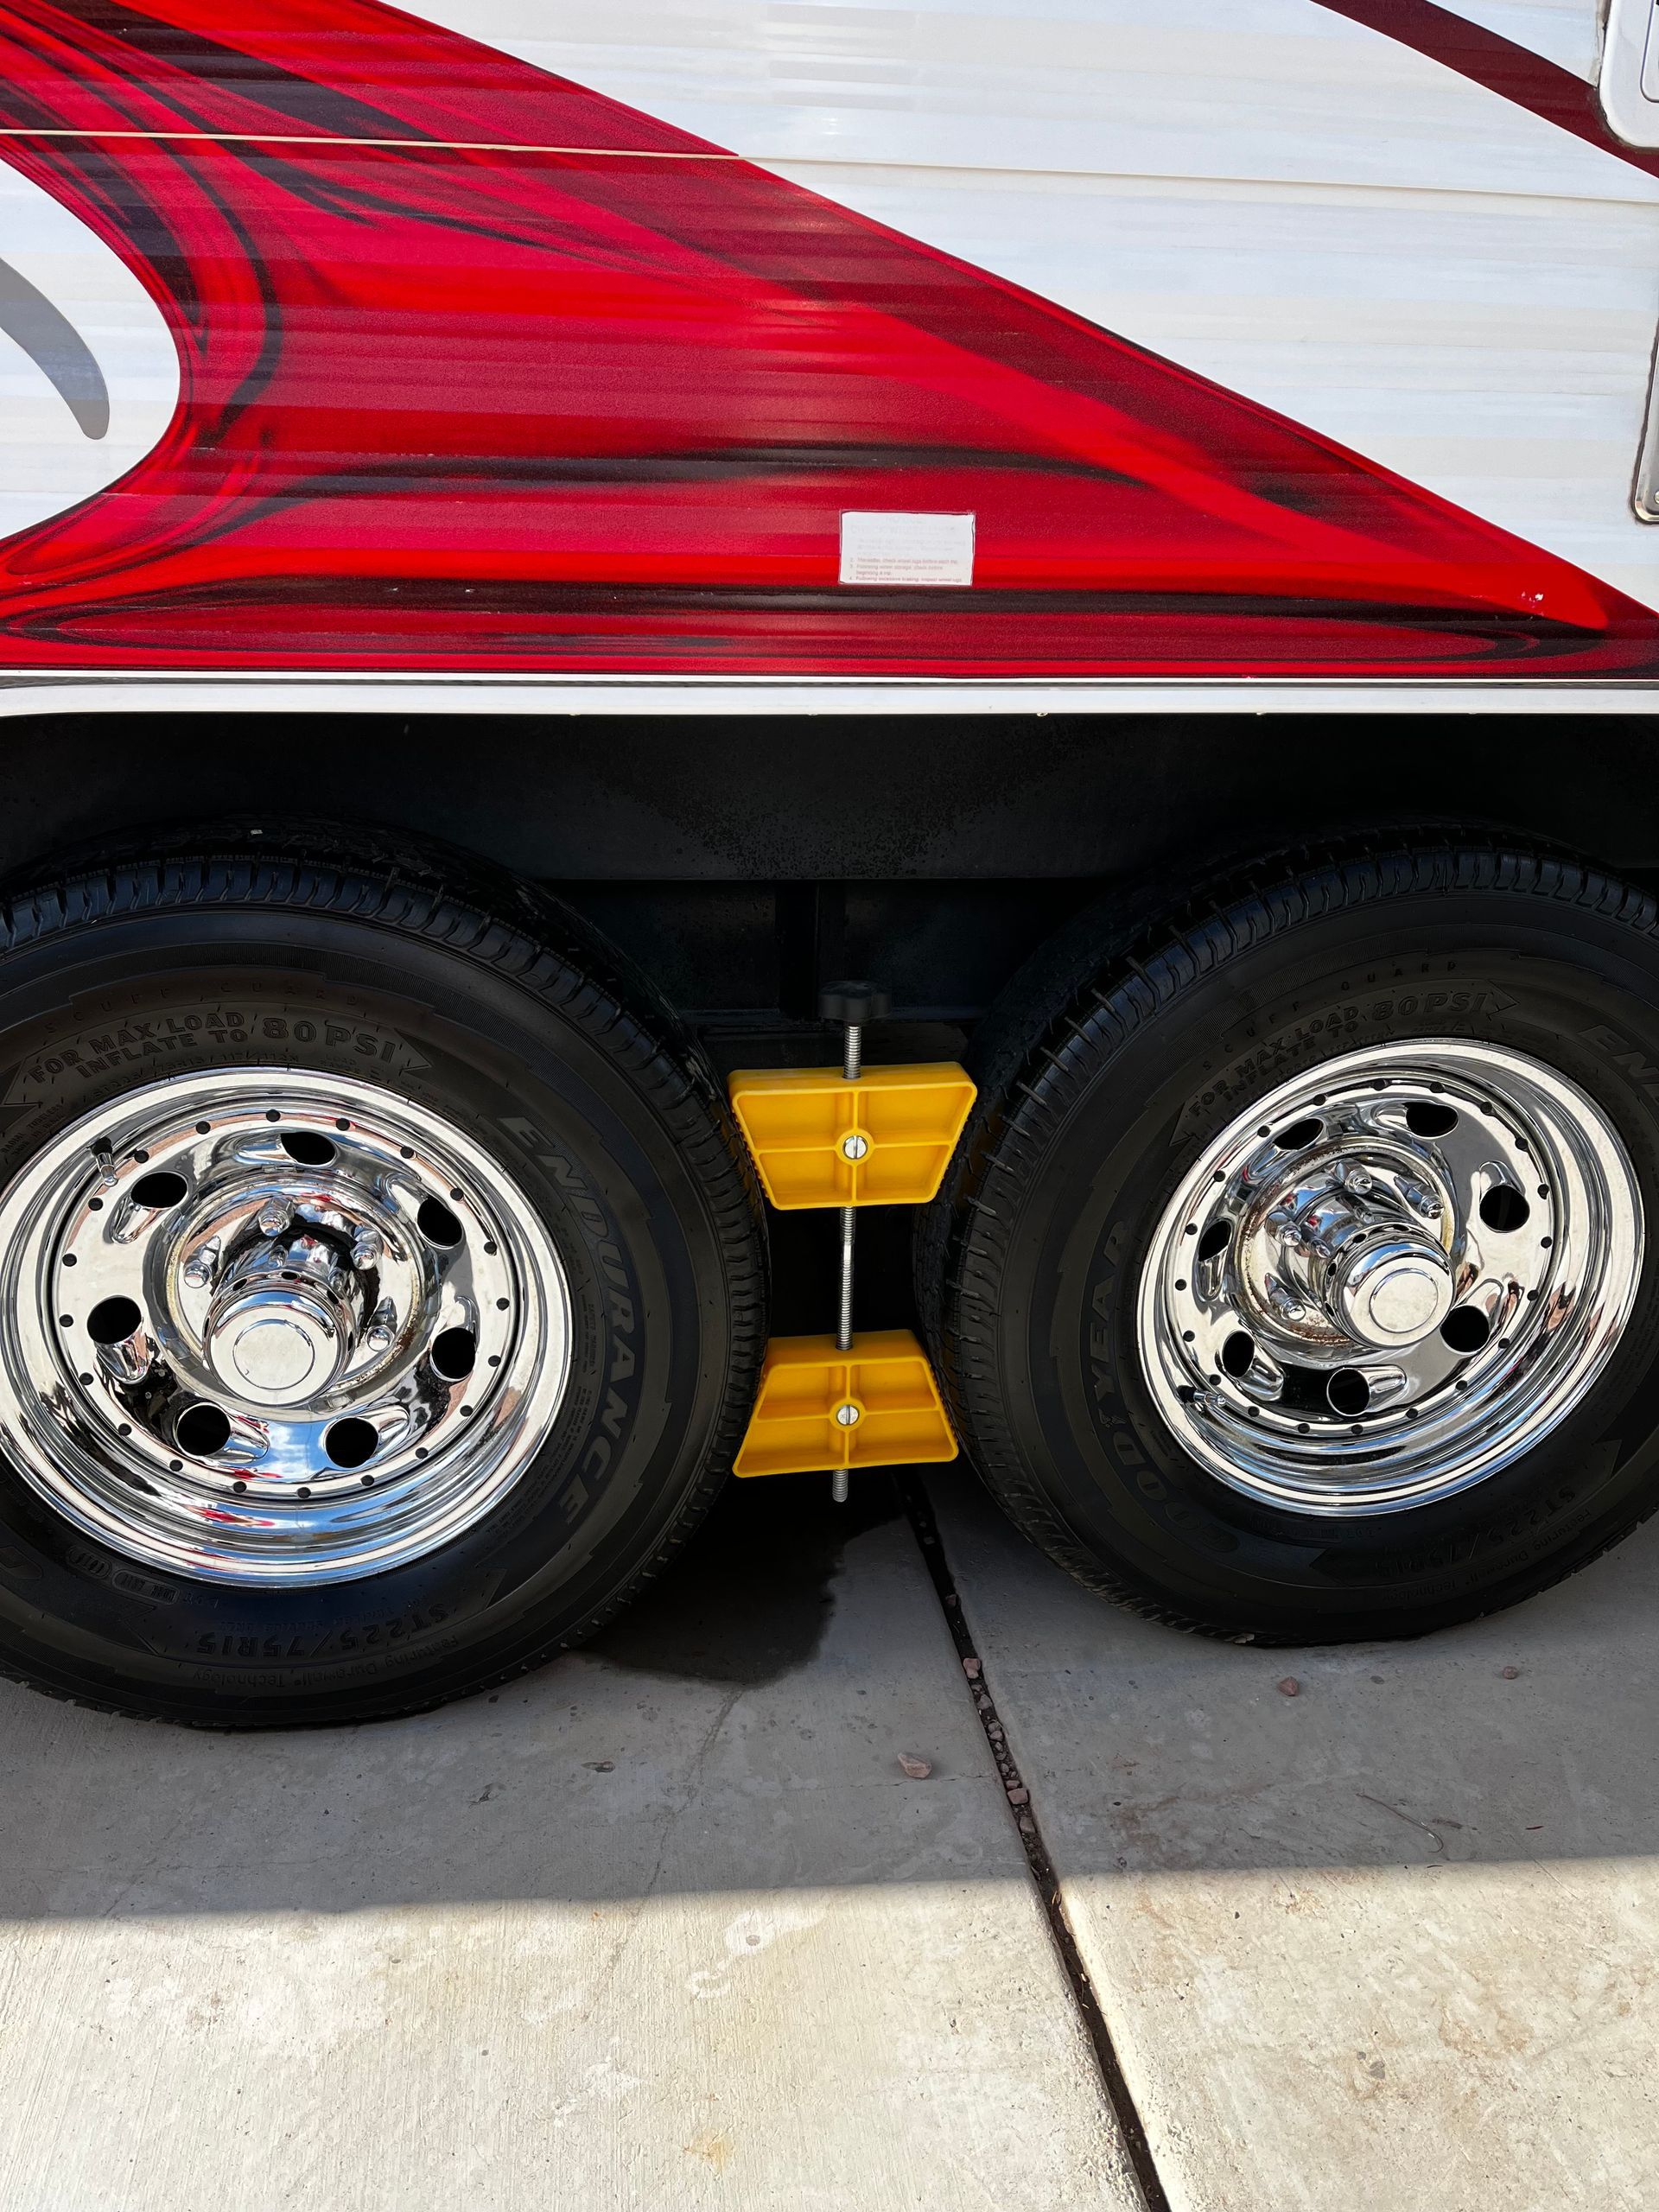 A close up of a truck 's wheels and tires